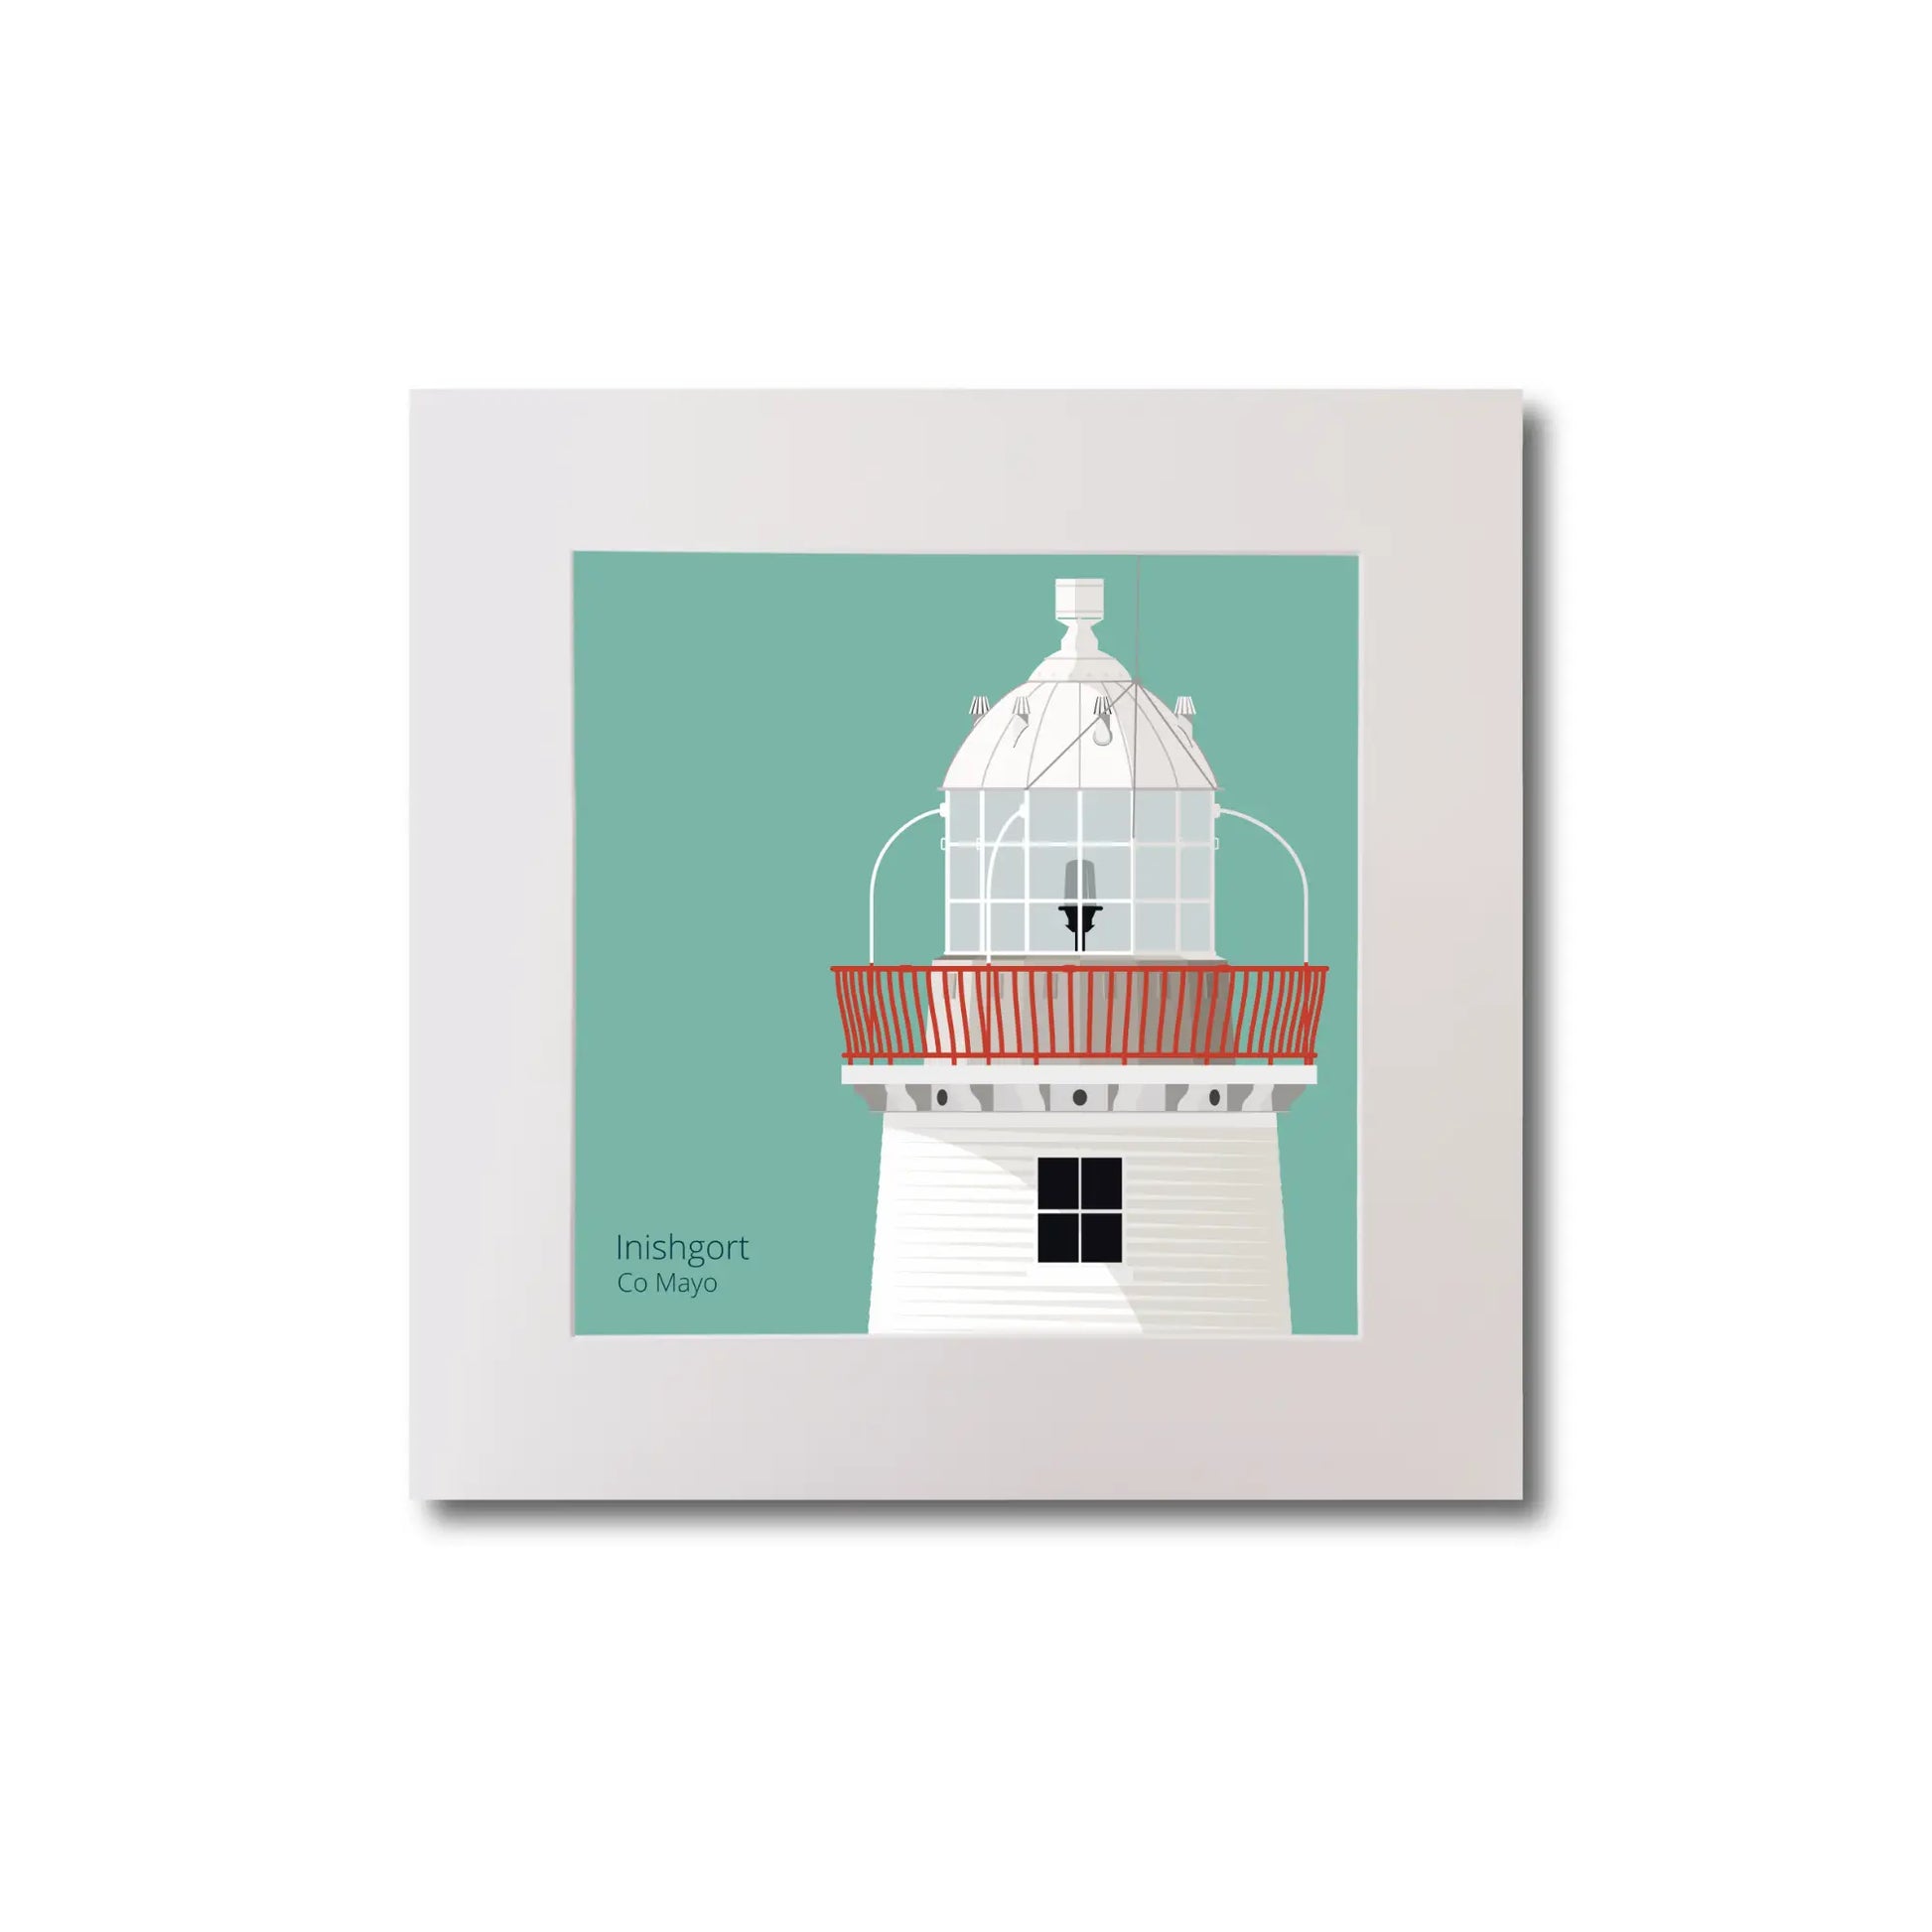 Illustration of Inishgort lighthouse on an ocean green background, mounted and measuring 20x20cm.